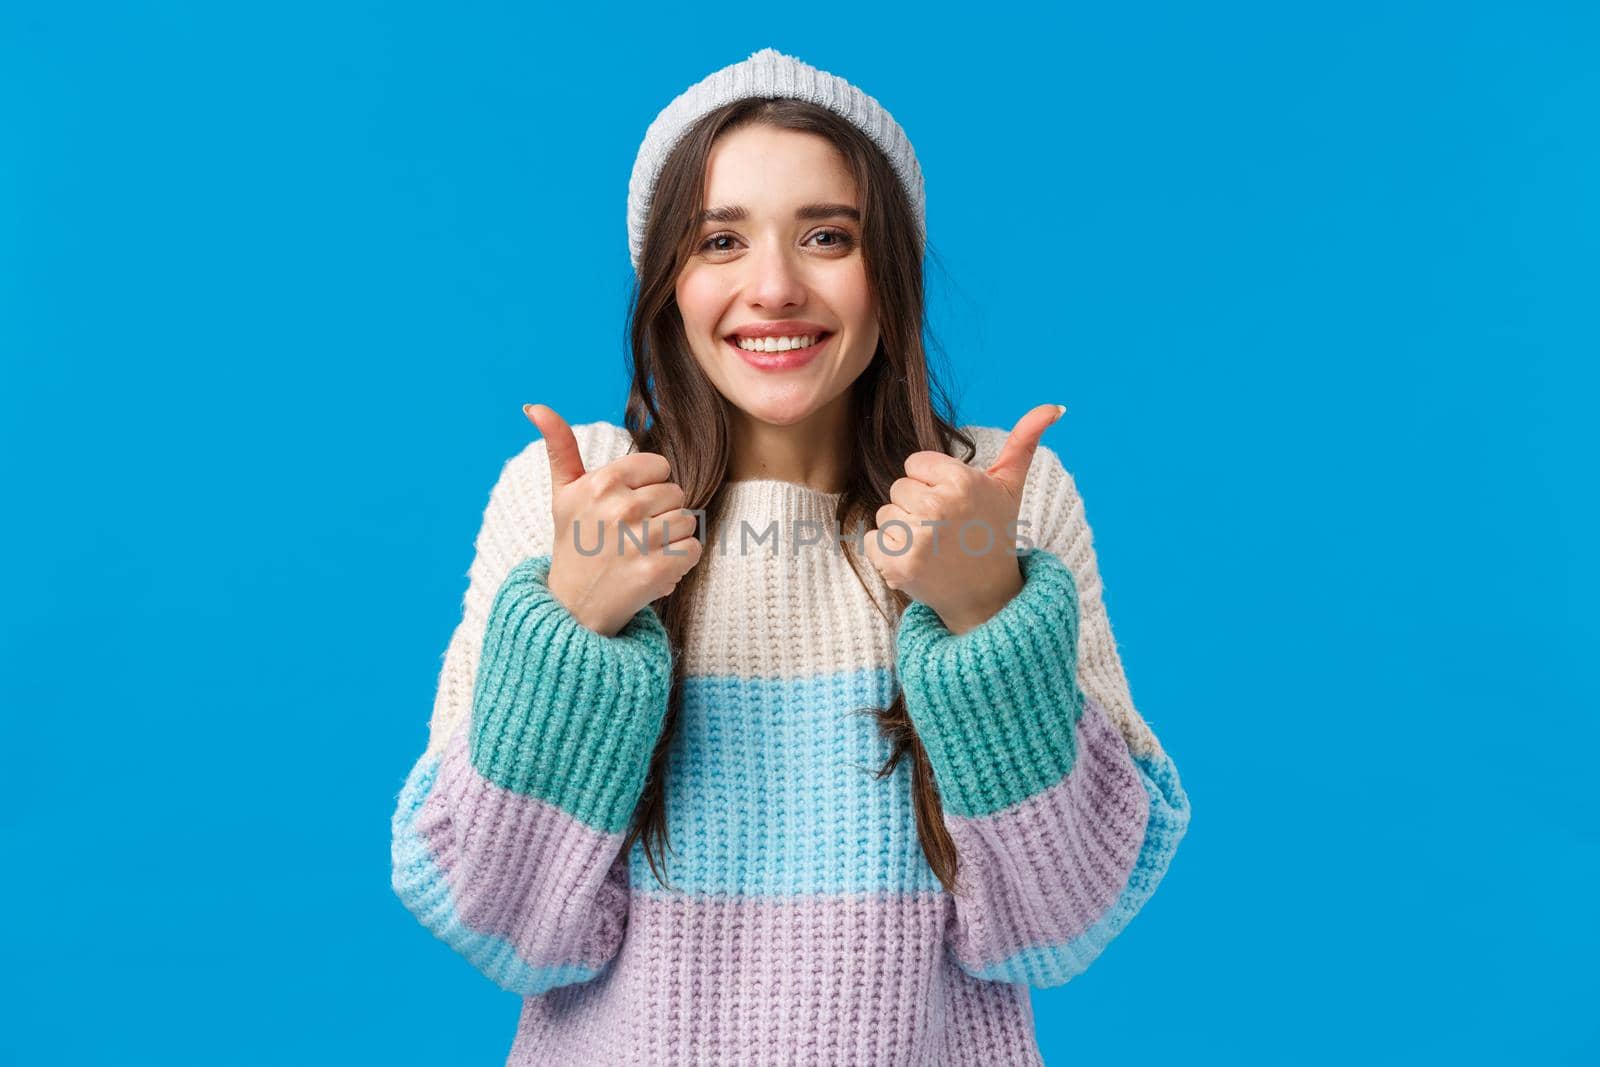 Super good, awesome idea. Cheerful glad cute brunette woman in winter hat, sweater, smiling and showing thumbs-up in approval, encourage friend, say congrats or yes, nod agreement, blue background.